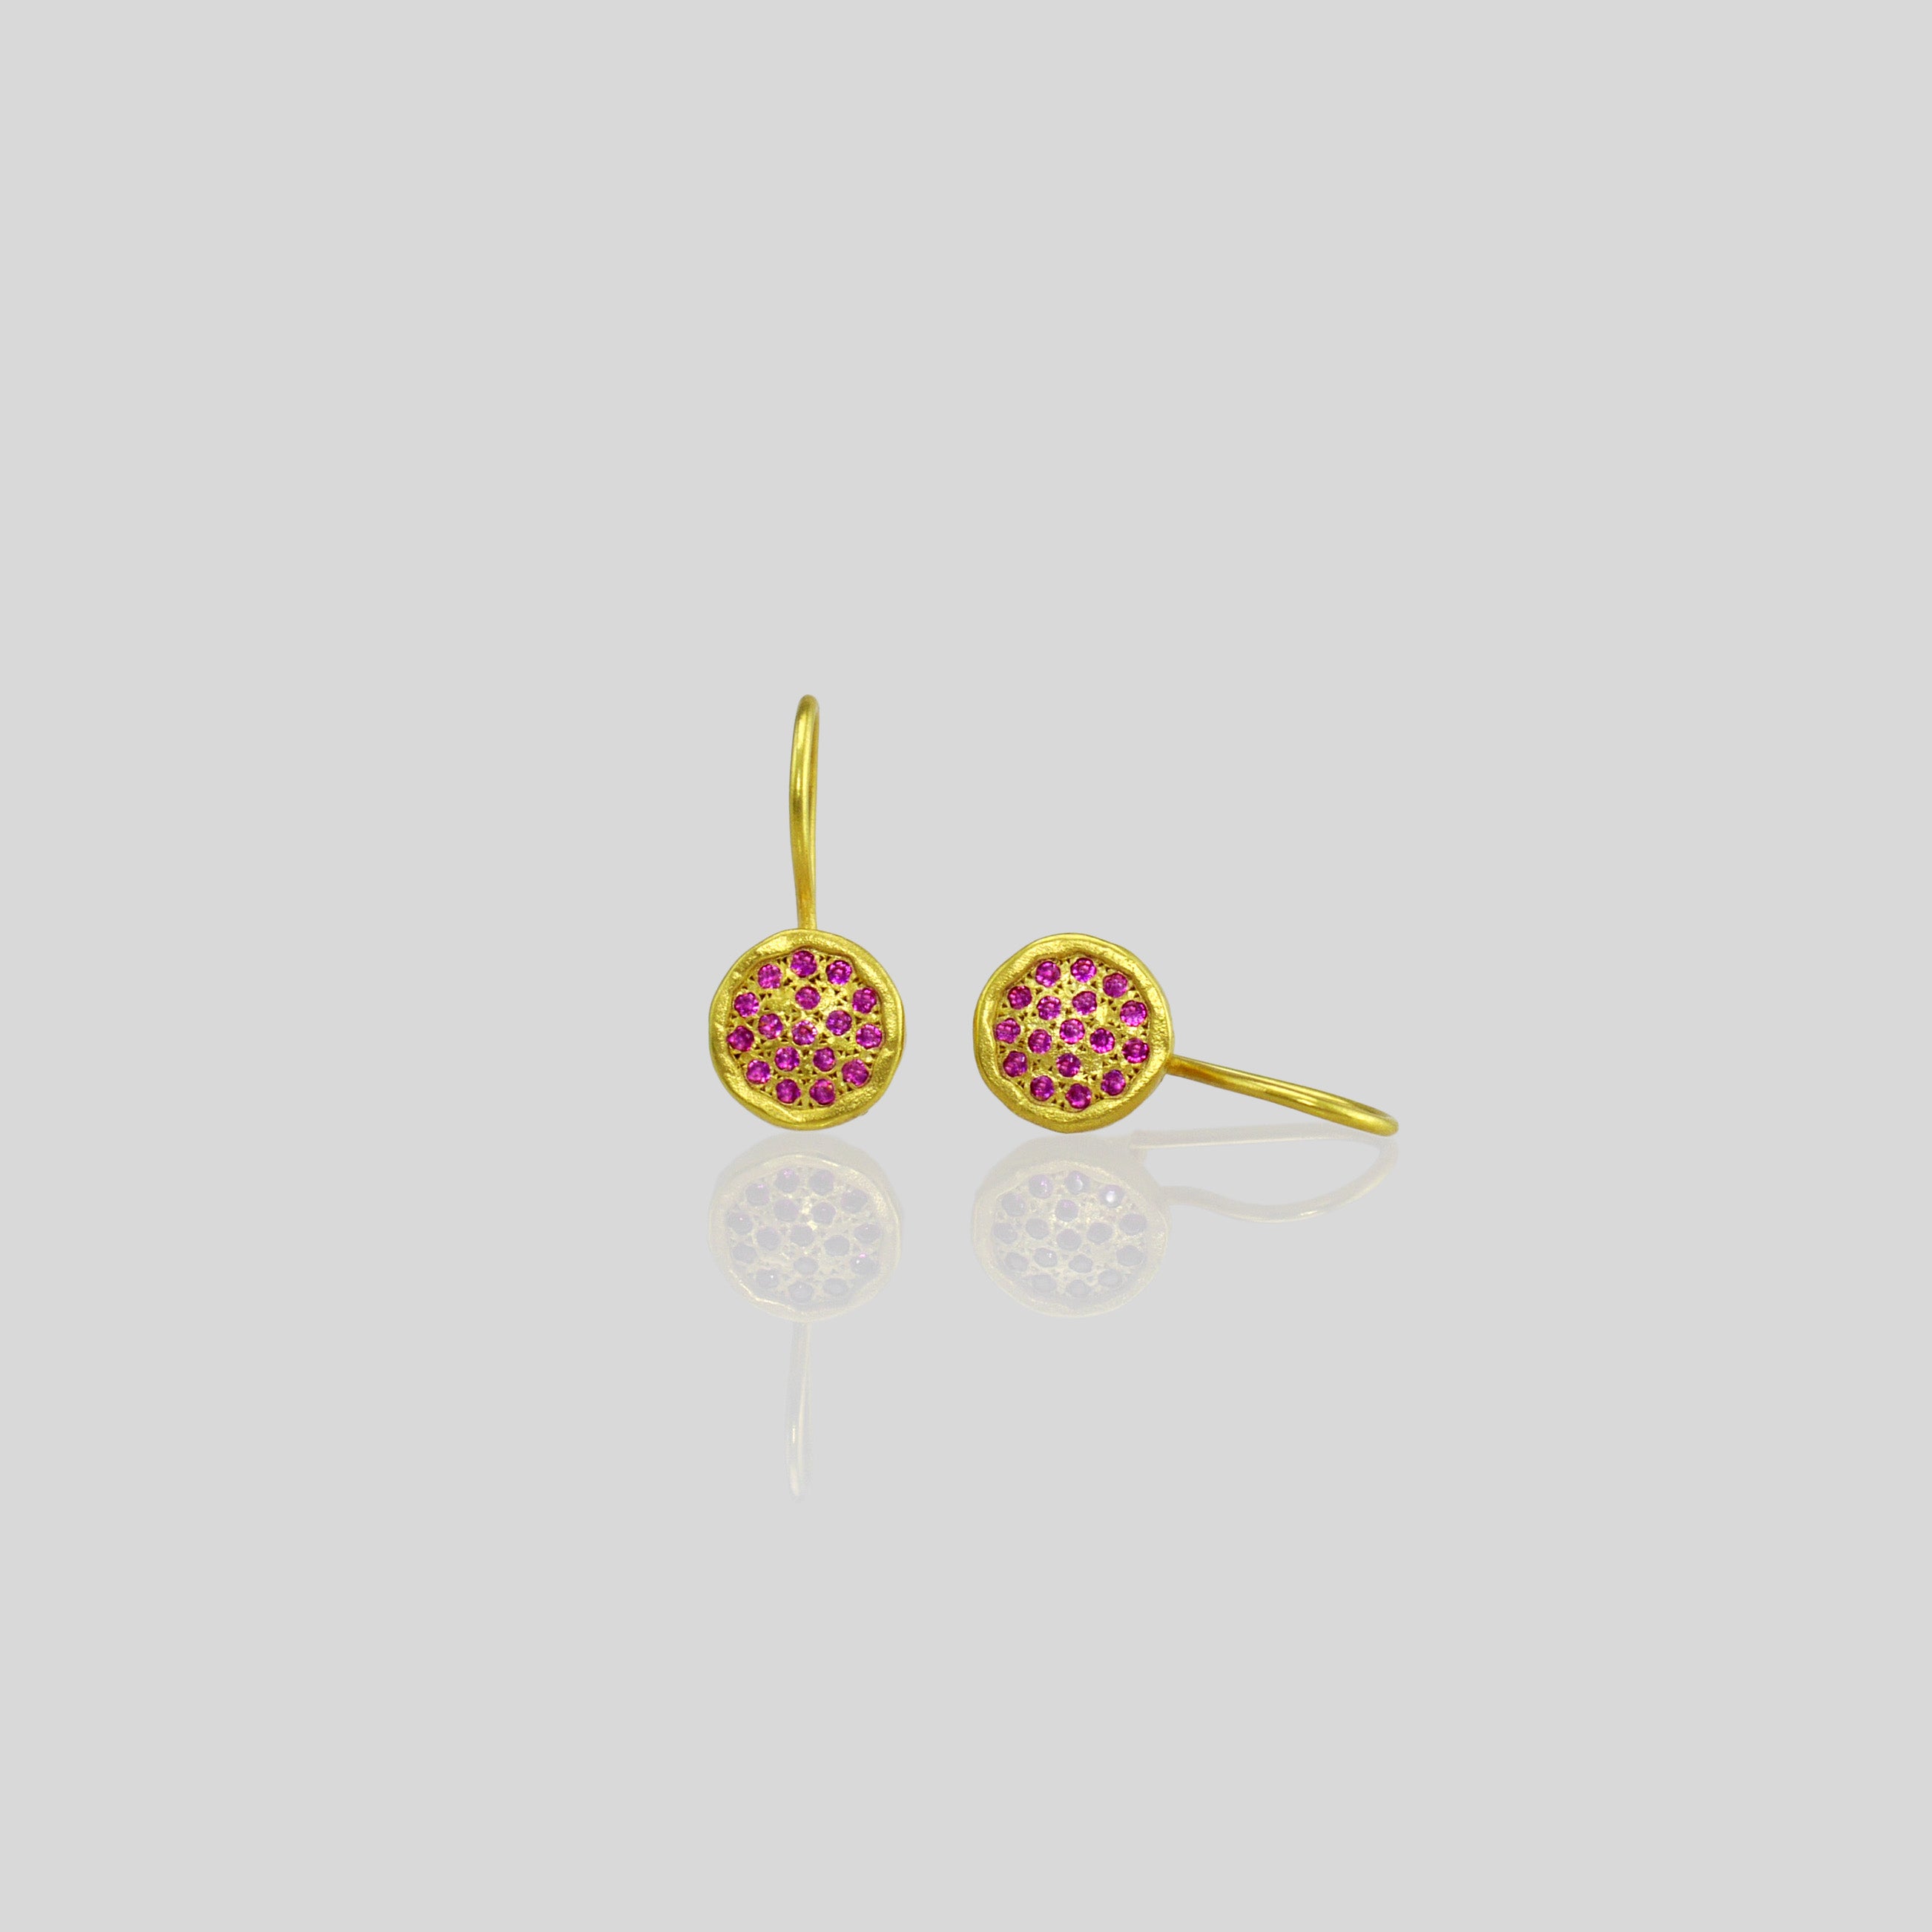 Gold drop earrings adorned with twinkling ruby gemstones, reminiscent of a starry night sky.